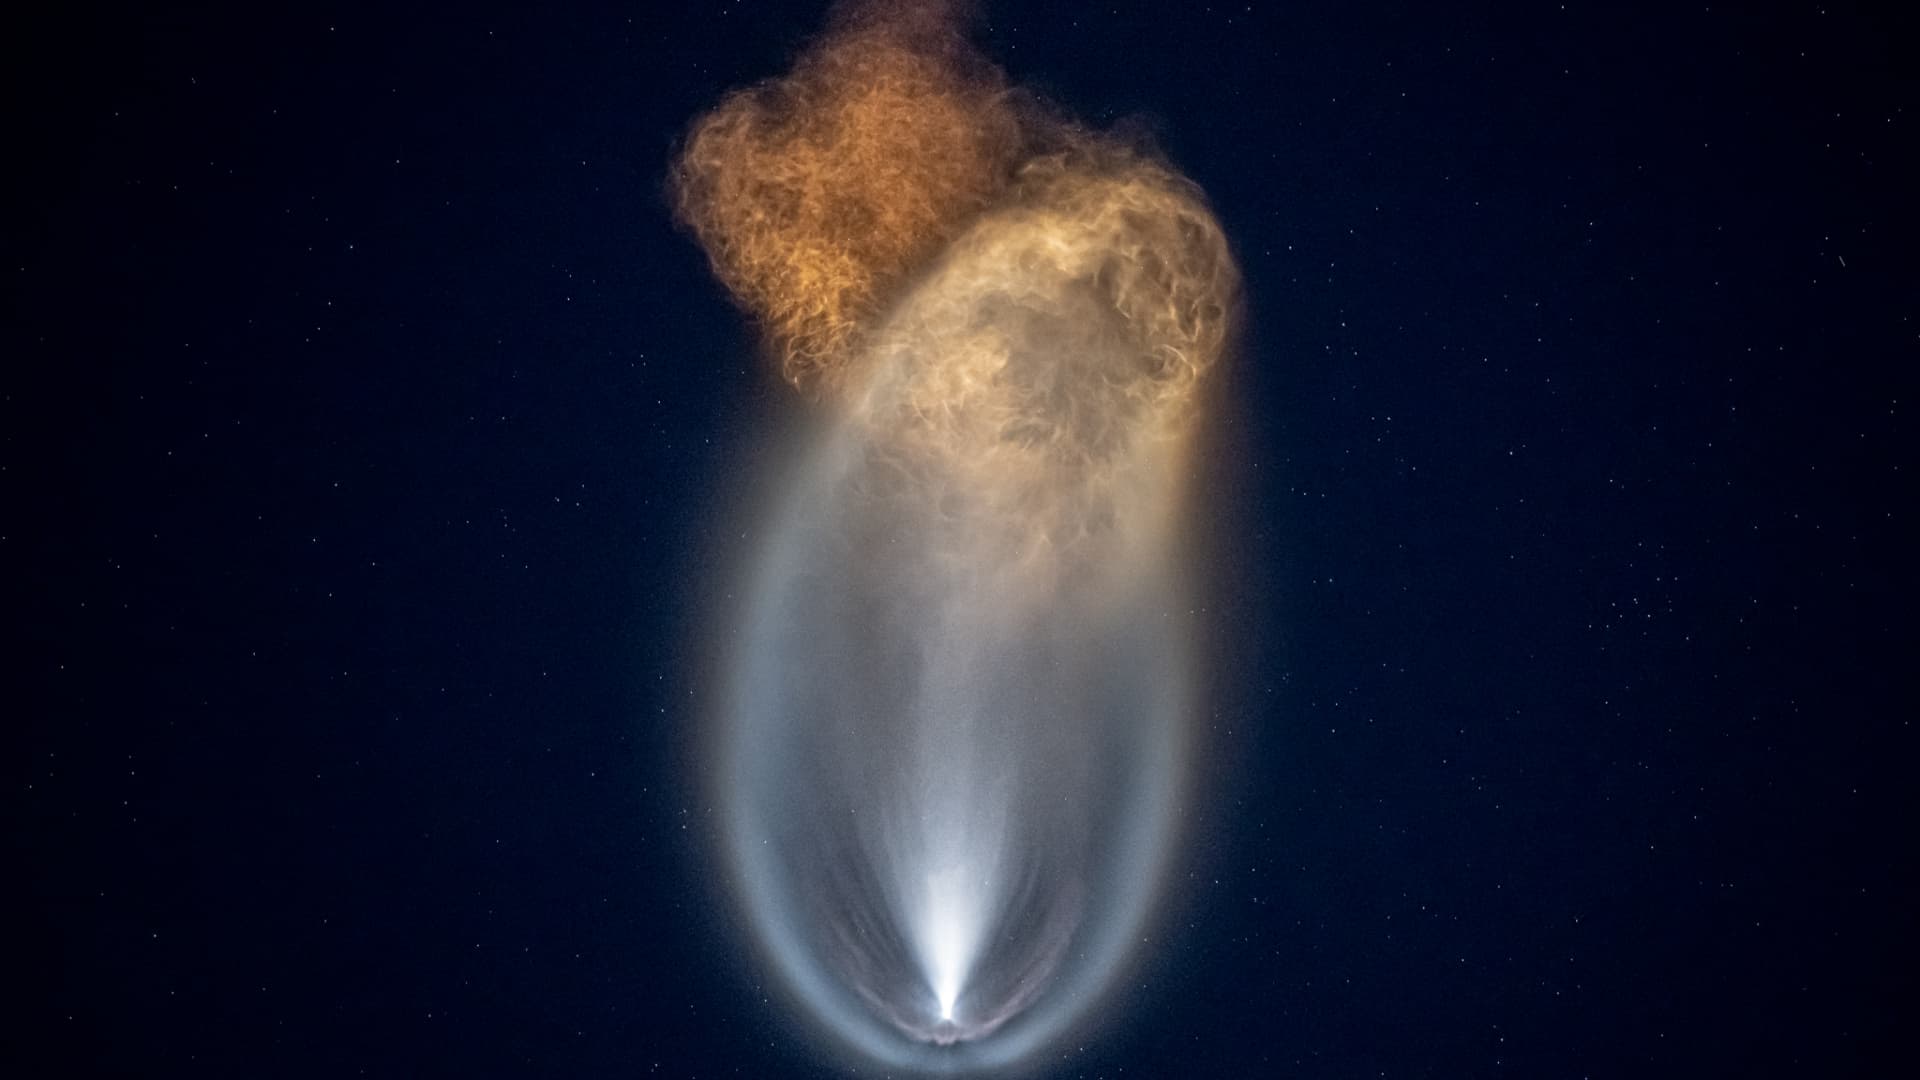 The shimmering exhaust plume of SpaceX's Falcon 9 rocket launching into the dusk sky above Florida on September 15, 2021.